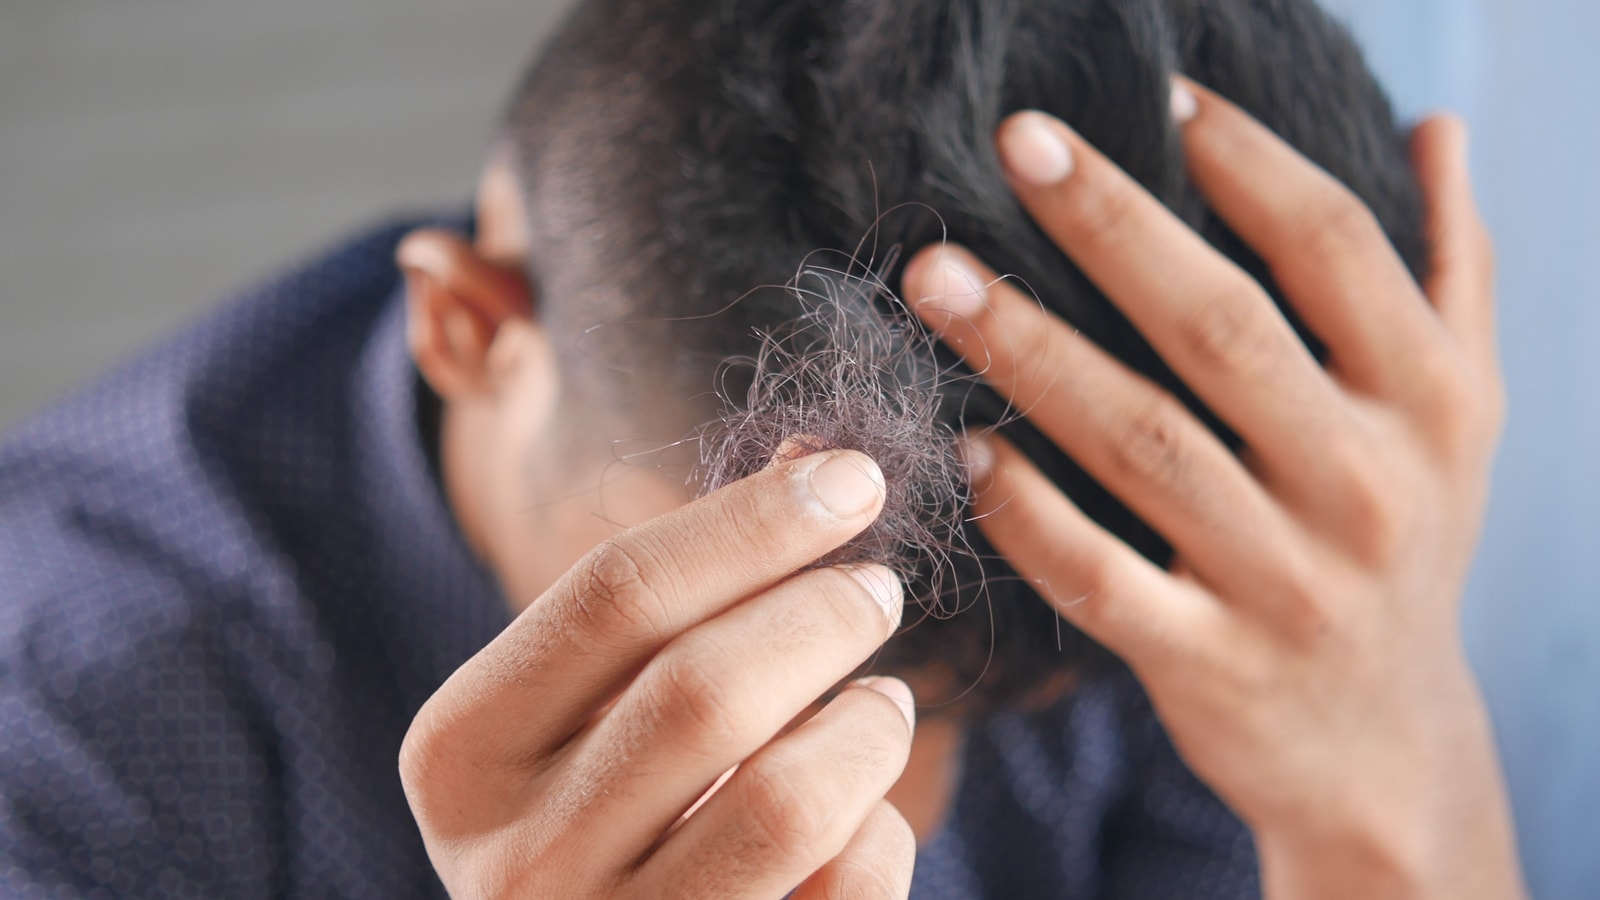 Hair thinning: Causes and treatment tips